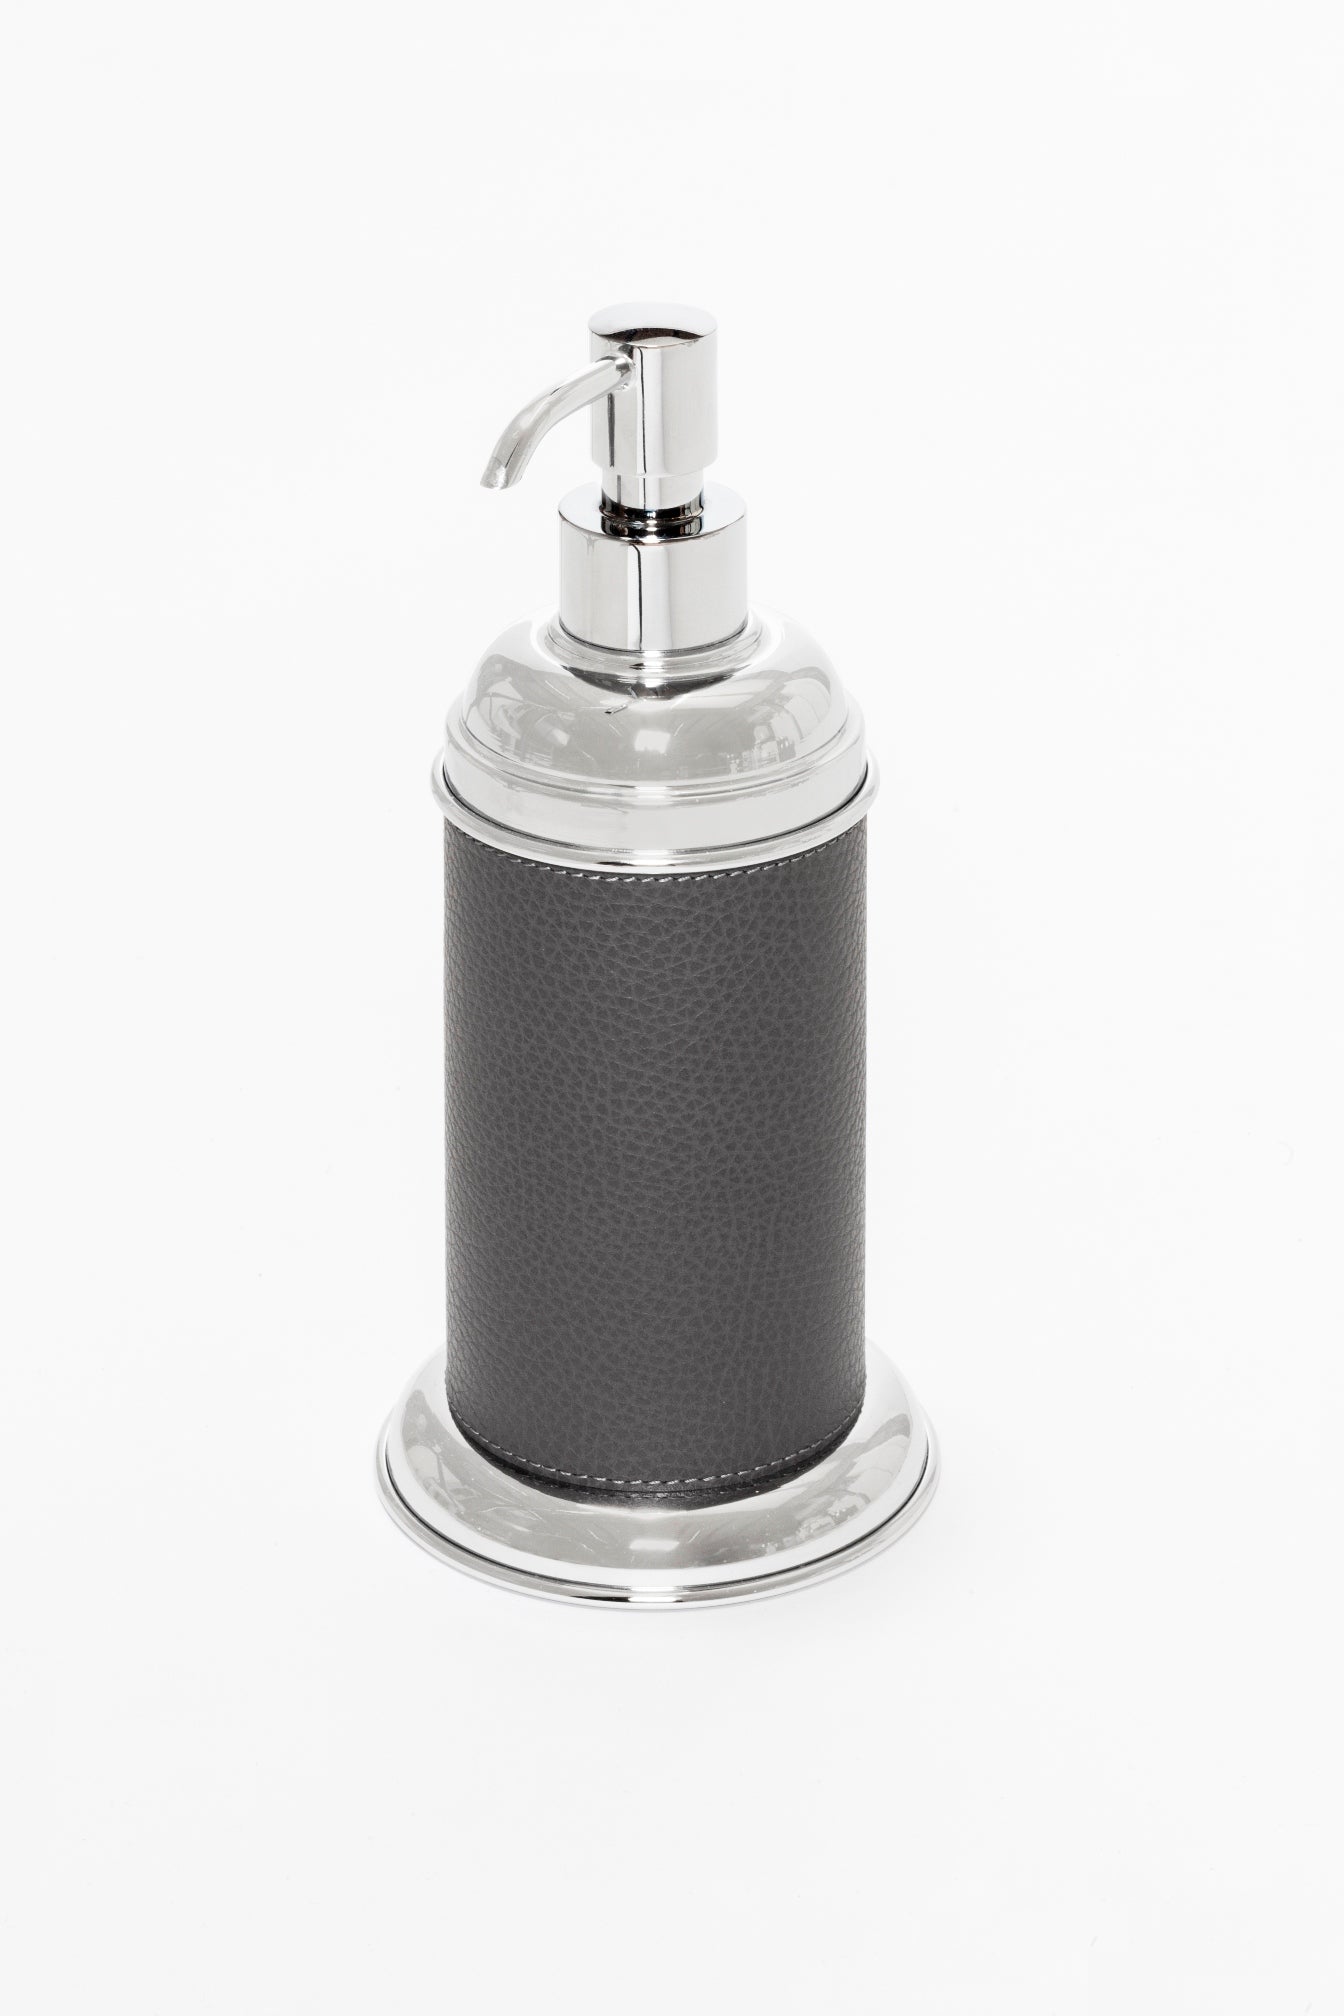 Giobagnara Dubai Leather-Covered Metal Soap Dispenser | Part of Dubai Bathroom Collection | Luxurious Bath Accessories | Crafted with Fine Leather-Covered Metal Structure | Different Finishes Available | Oriental-Inspired Design | Explore the Dubai Bathroom Collection at 2Jour Concierge, #1 luxury high-end gift & lifestyle shop